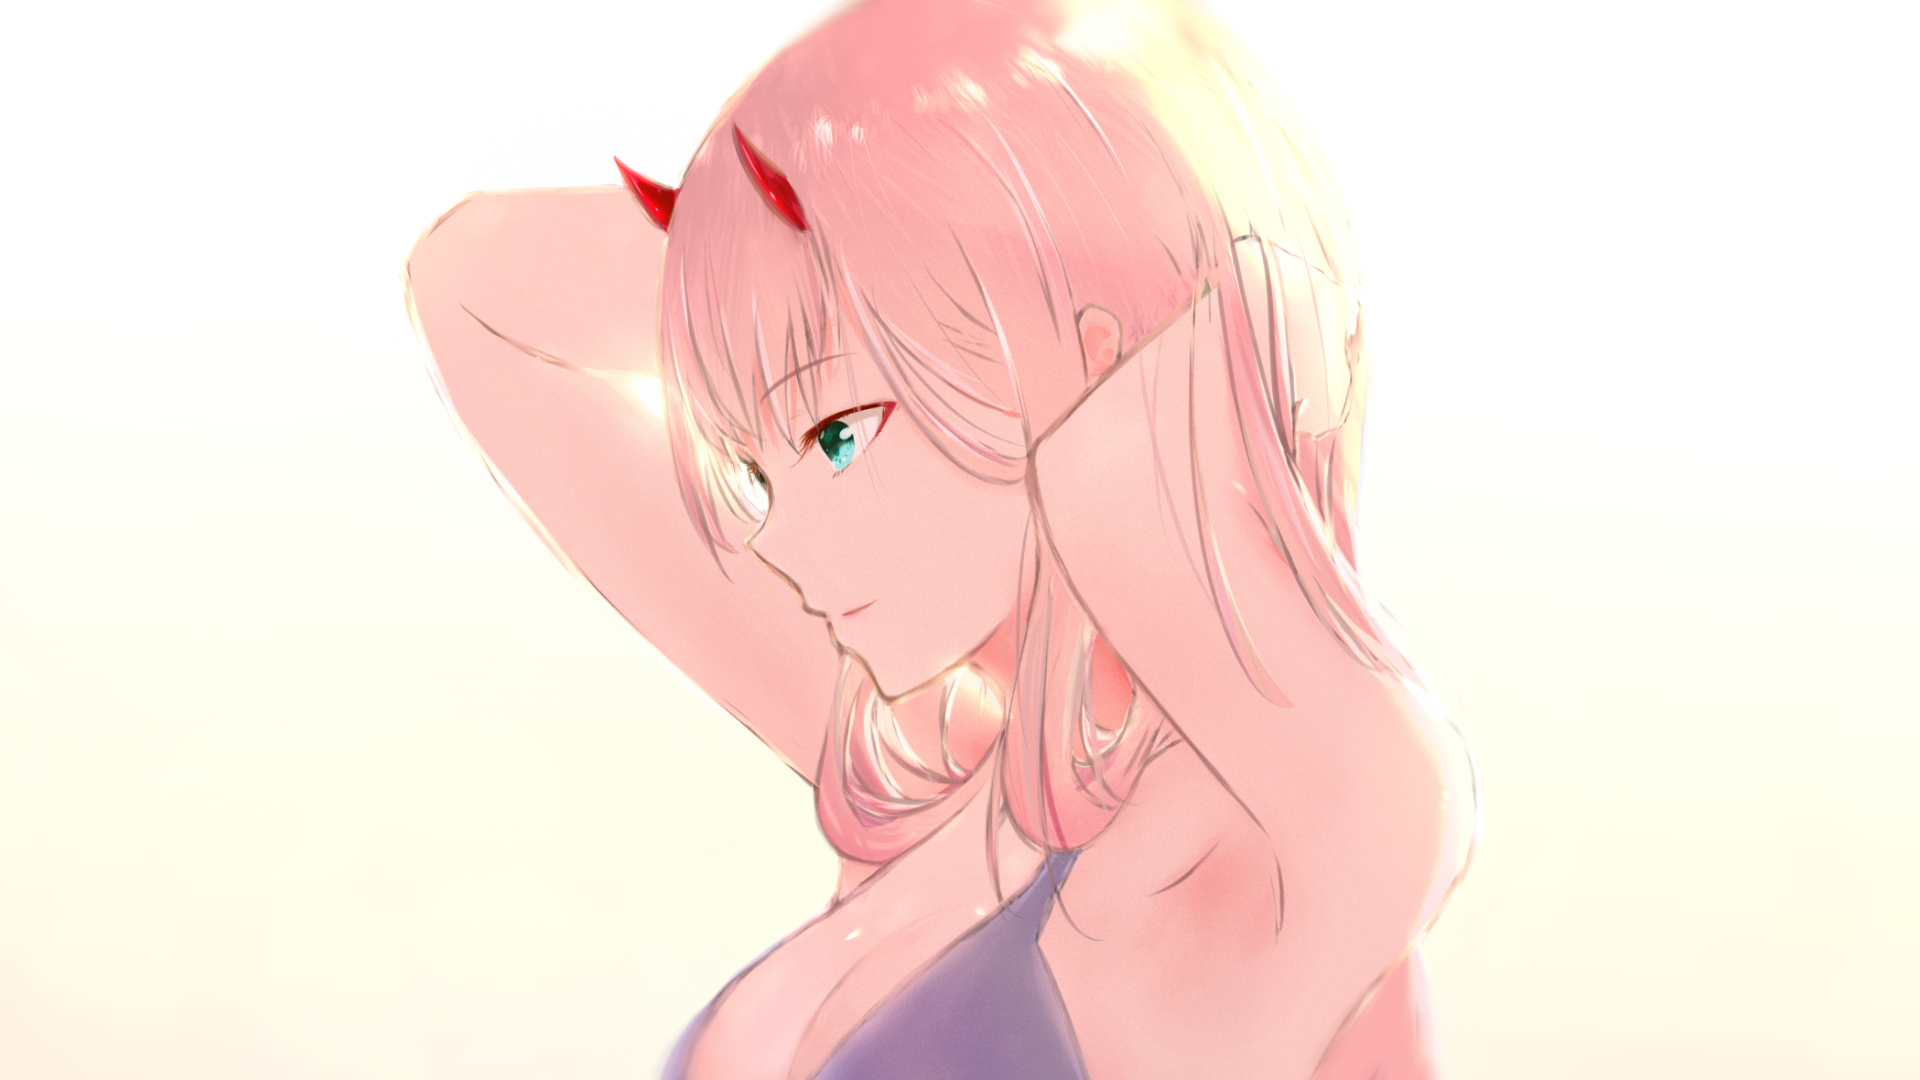 Anime 1920x1080 anime anime girls pale Darling in the FranXX fan art Zero Two (Darling in the FranXX) white background pink hair Teataster